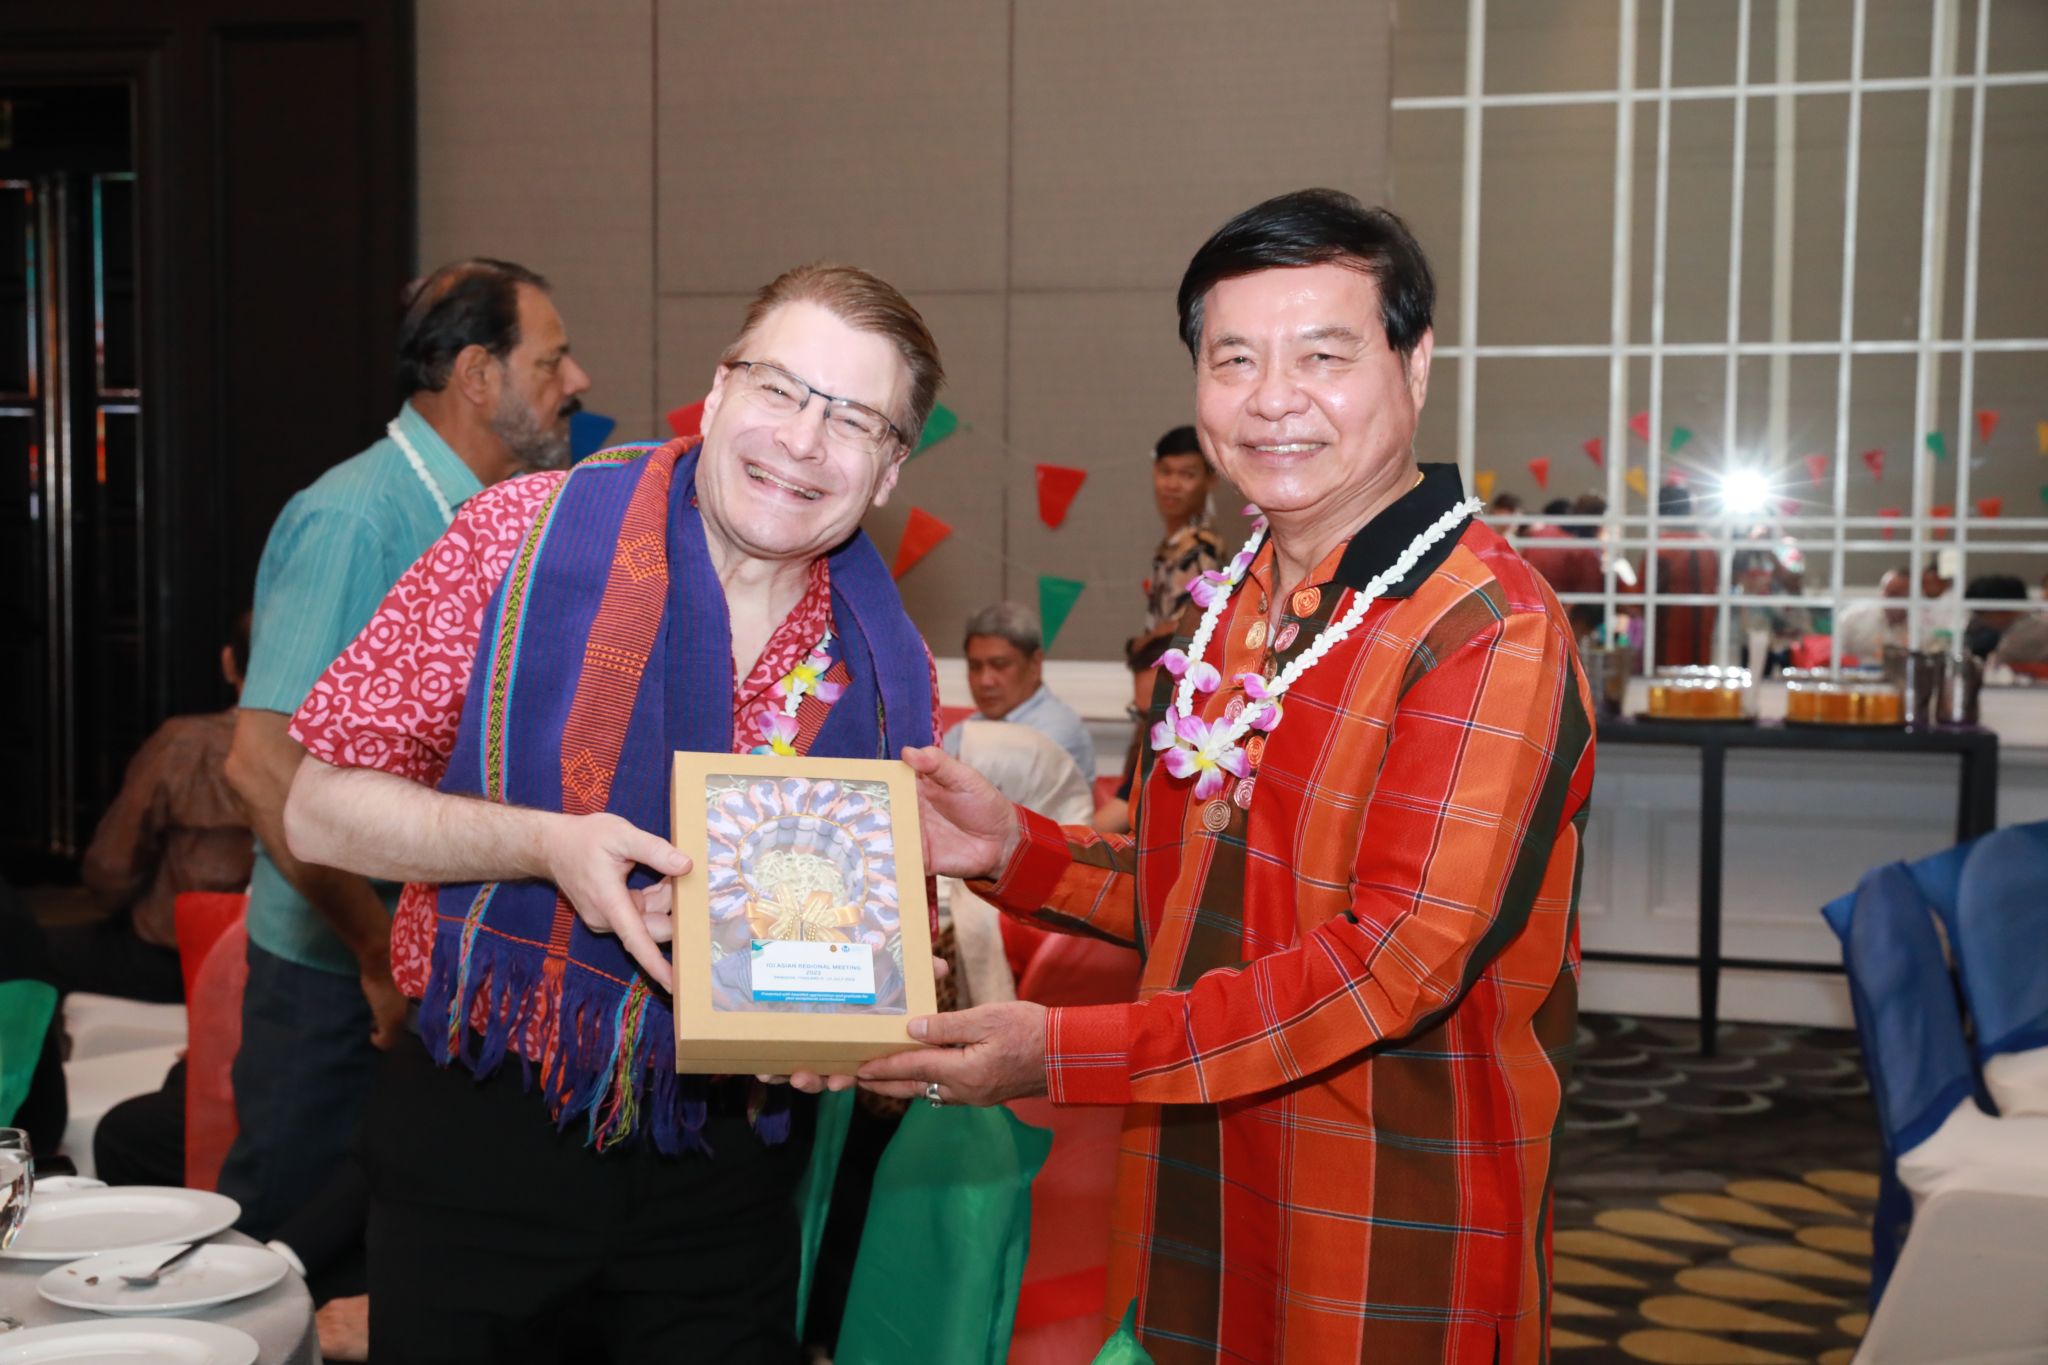 IOI President, Chris Field PSM and Chief Ombudsman of Thailand and Asia Region President, Somsak Suwansujarit.